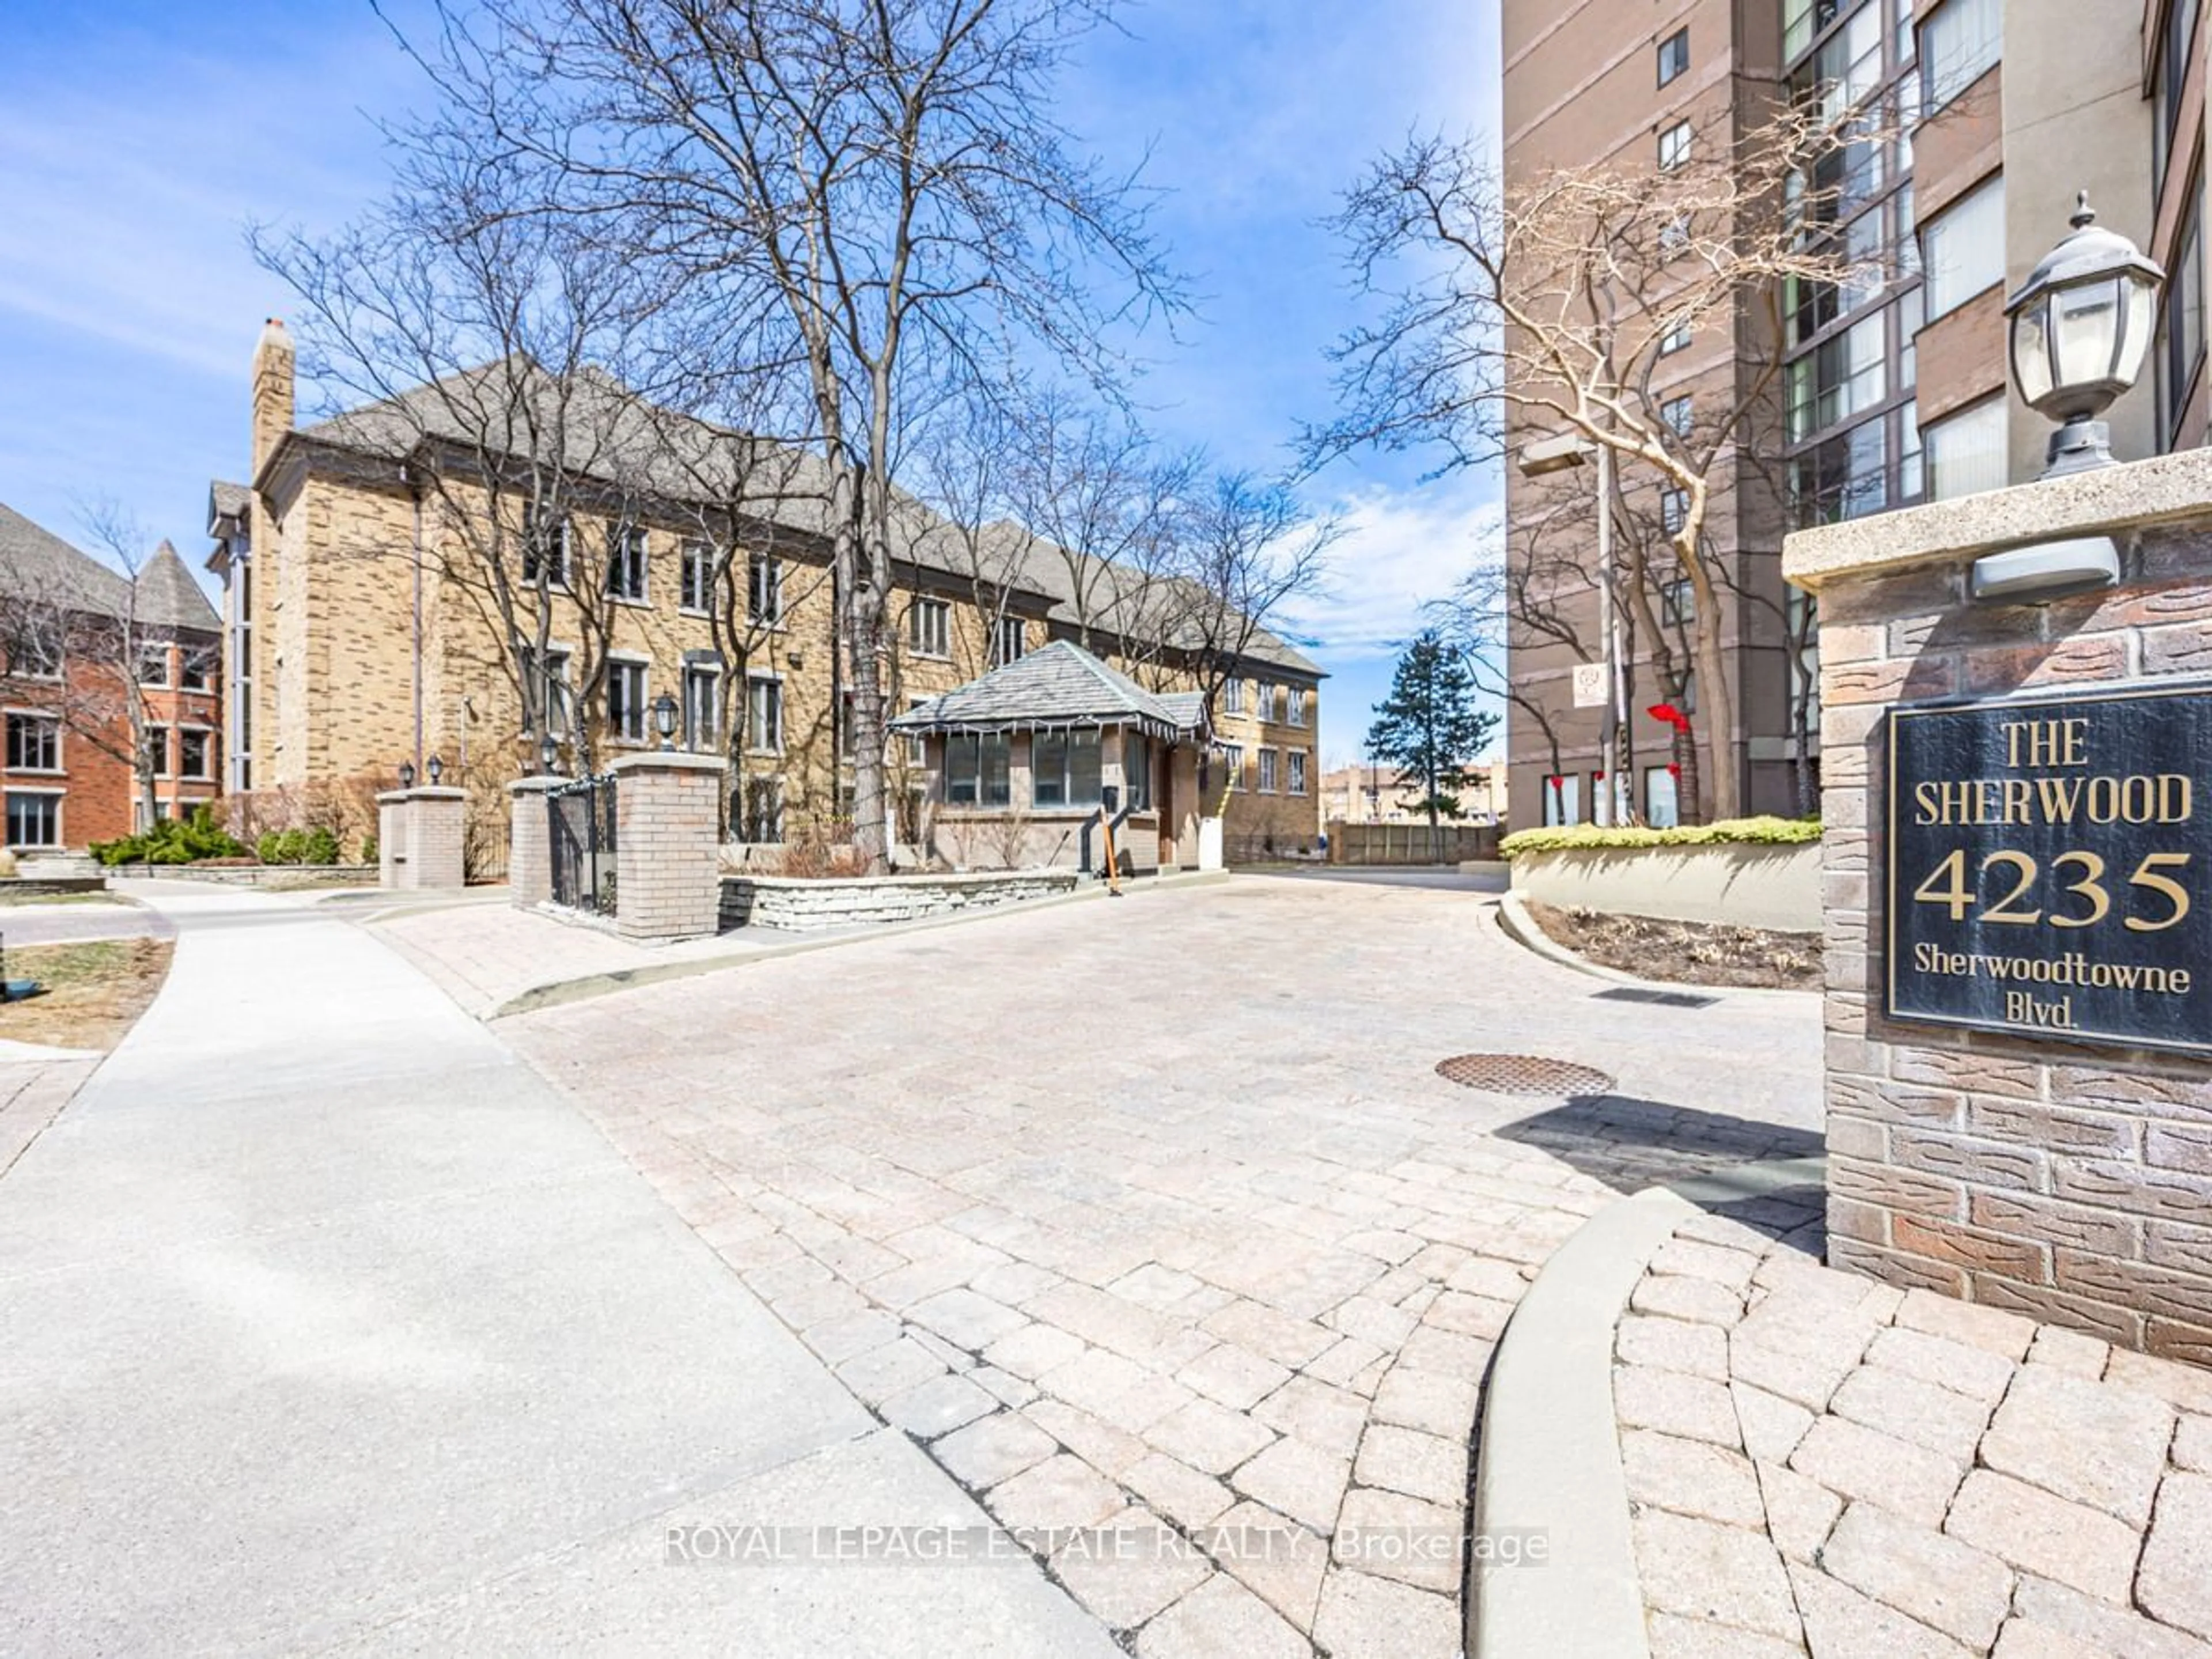 A pic from exterior of the house or condo for 4235 Sherwoodtowne Blvd #907, Mississauga Ontario L4Z 1W3